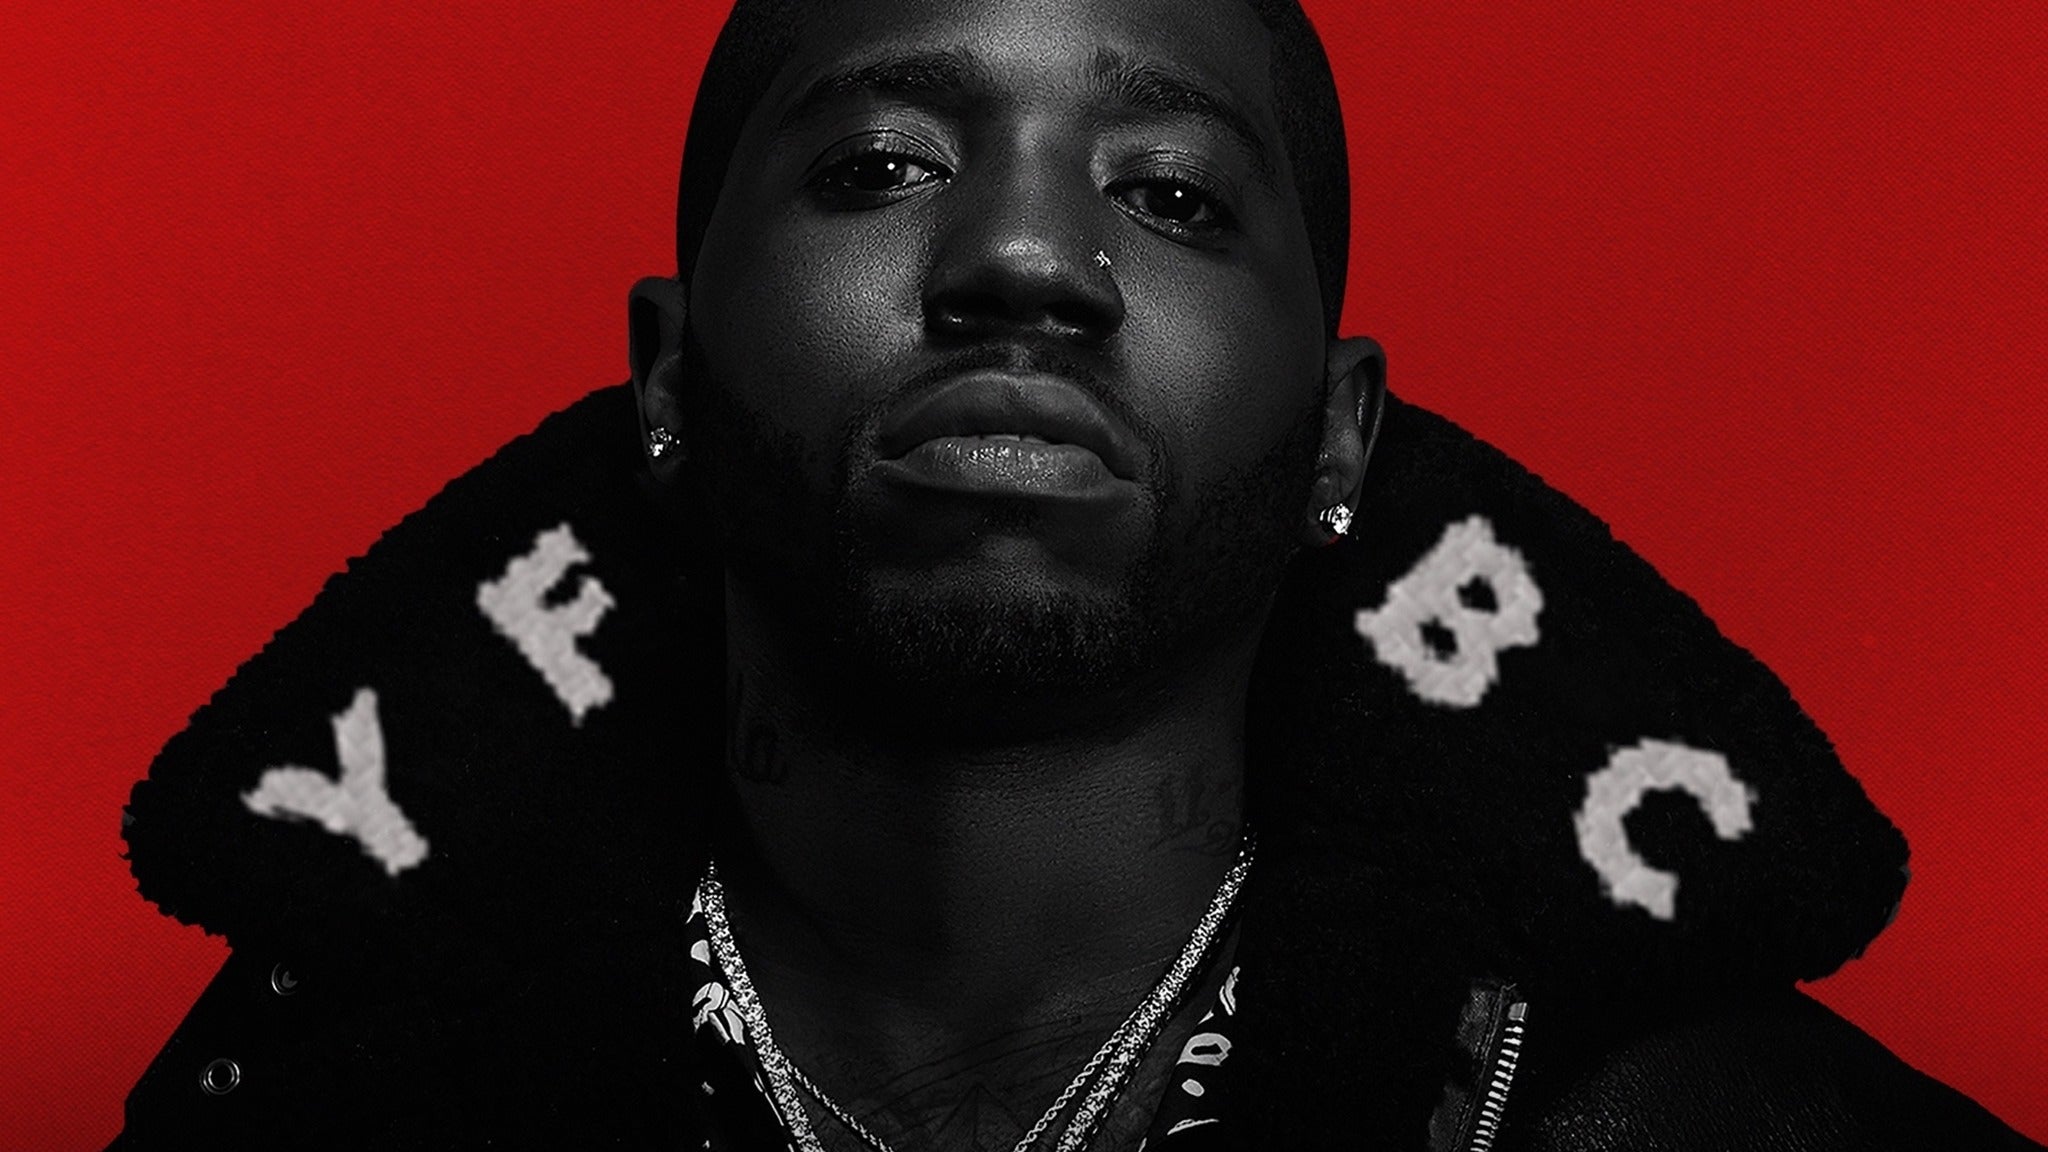 Yfn Lucci in New York promo photo for Live Nation presale offer code